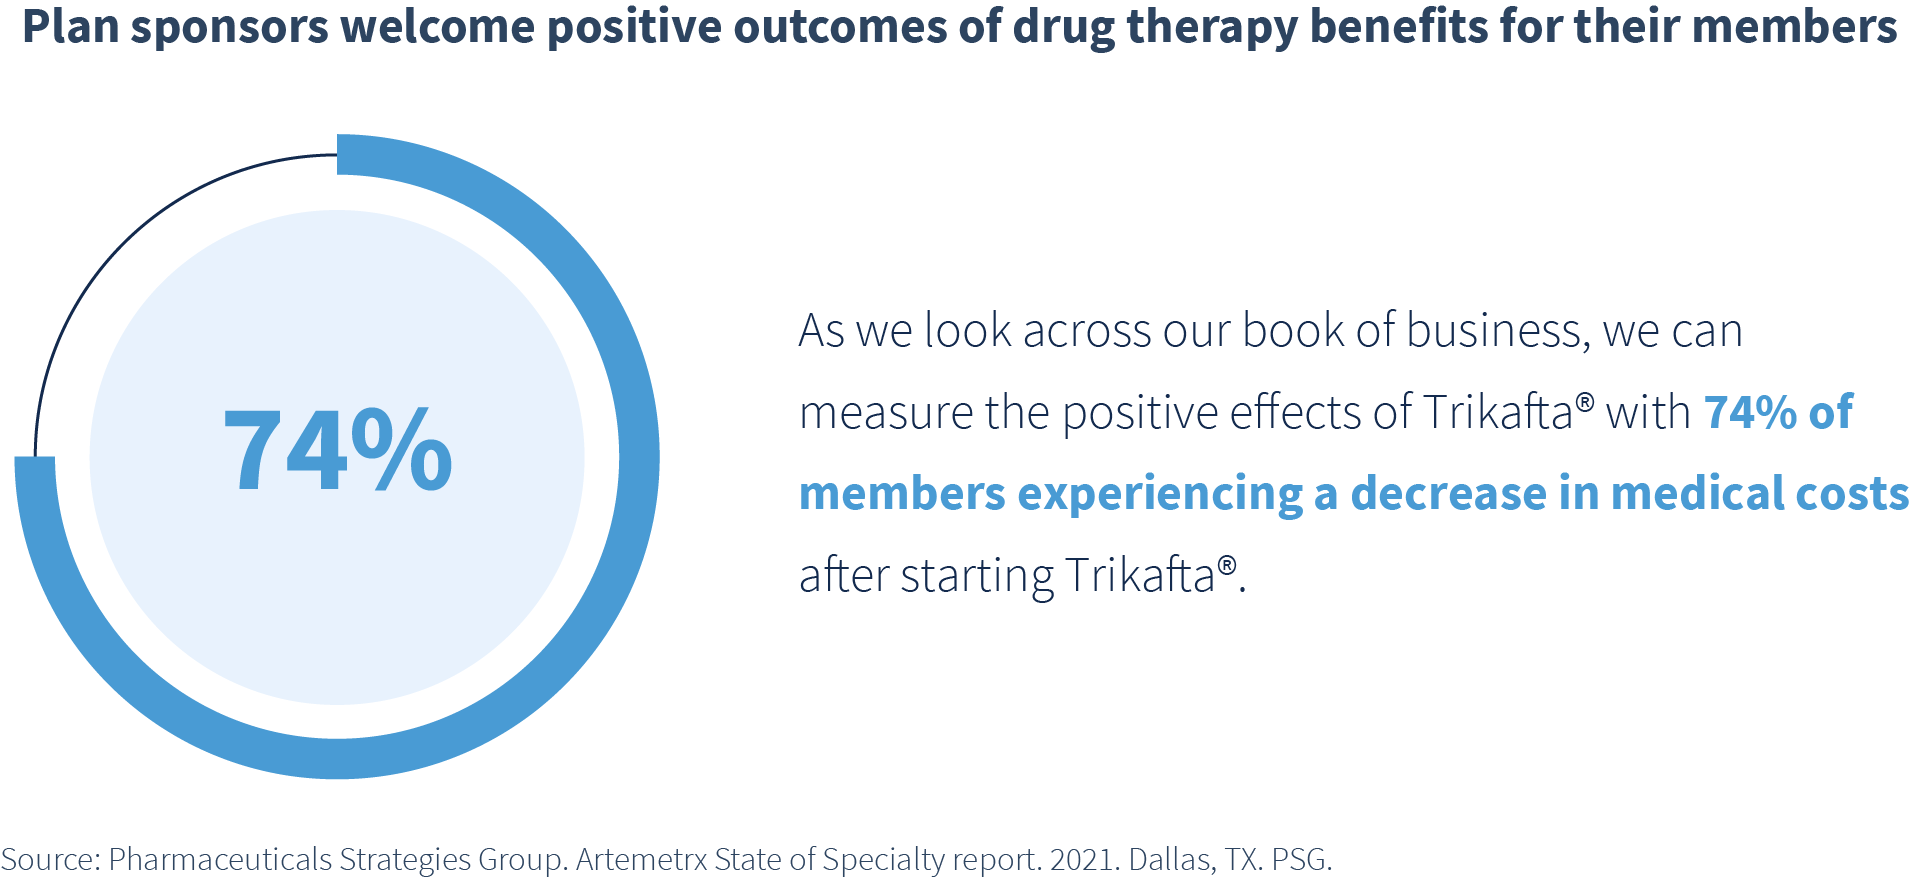 Graphic showing that 74% of members experience a decrease in medical costs after starting Trikafta.